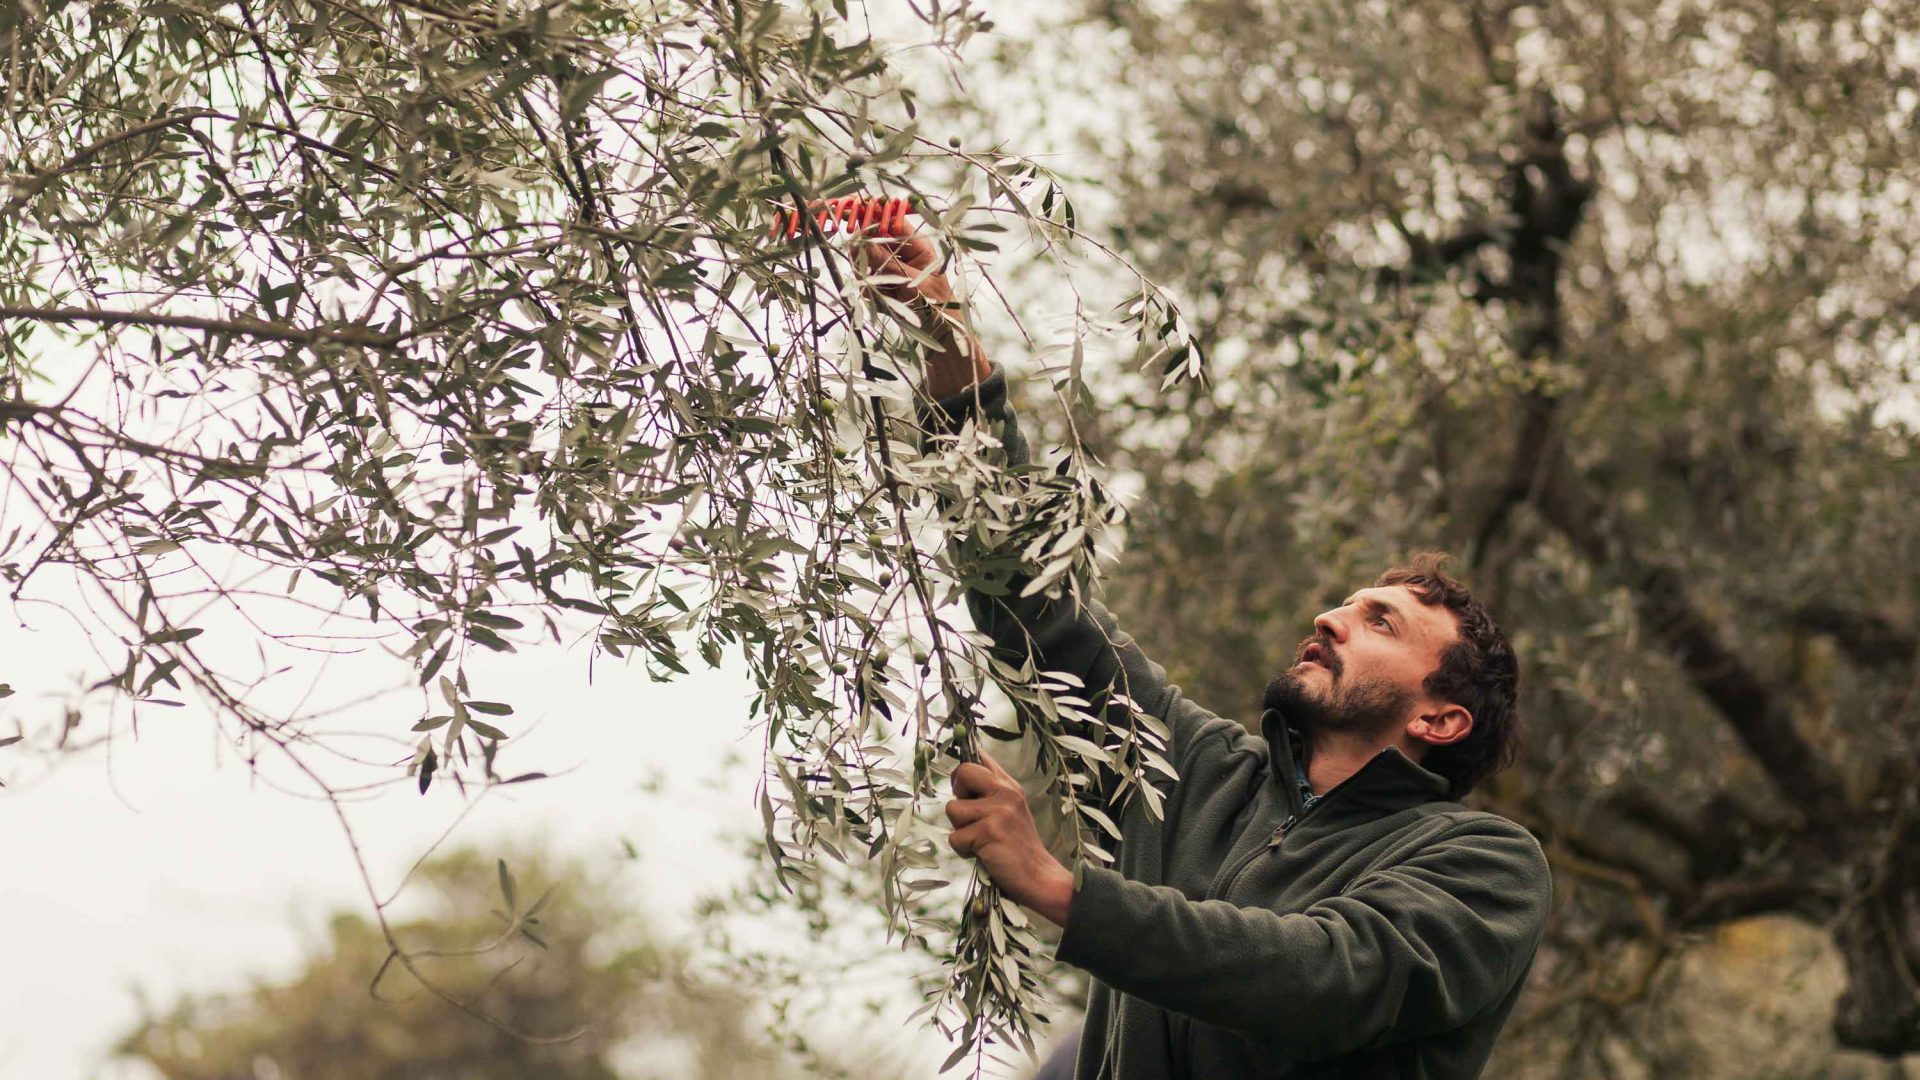 Olives are hand raked by a worker.